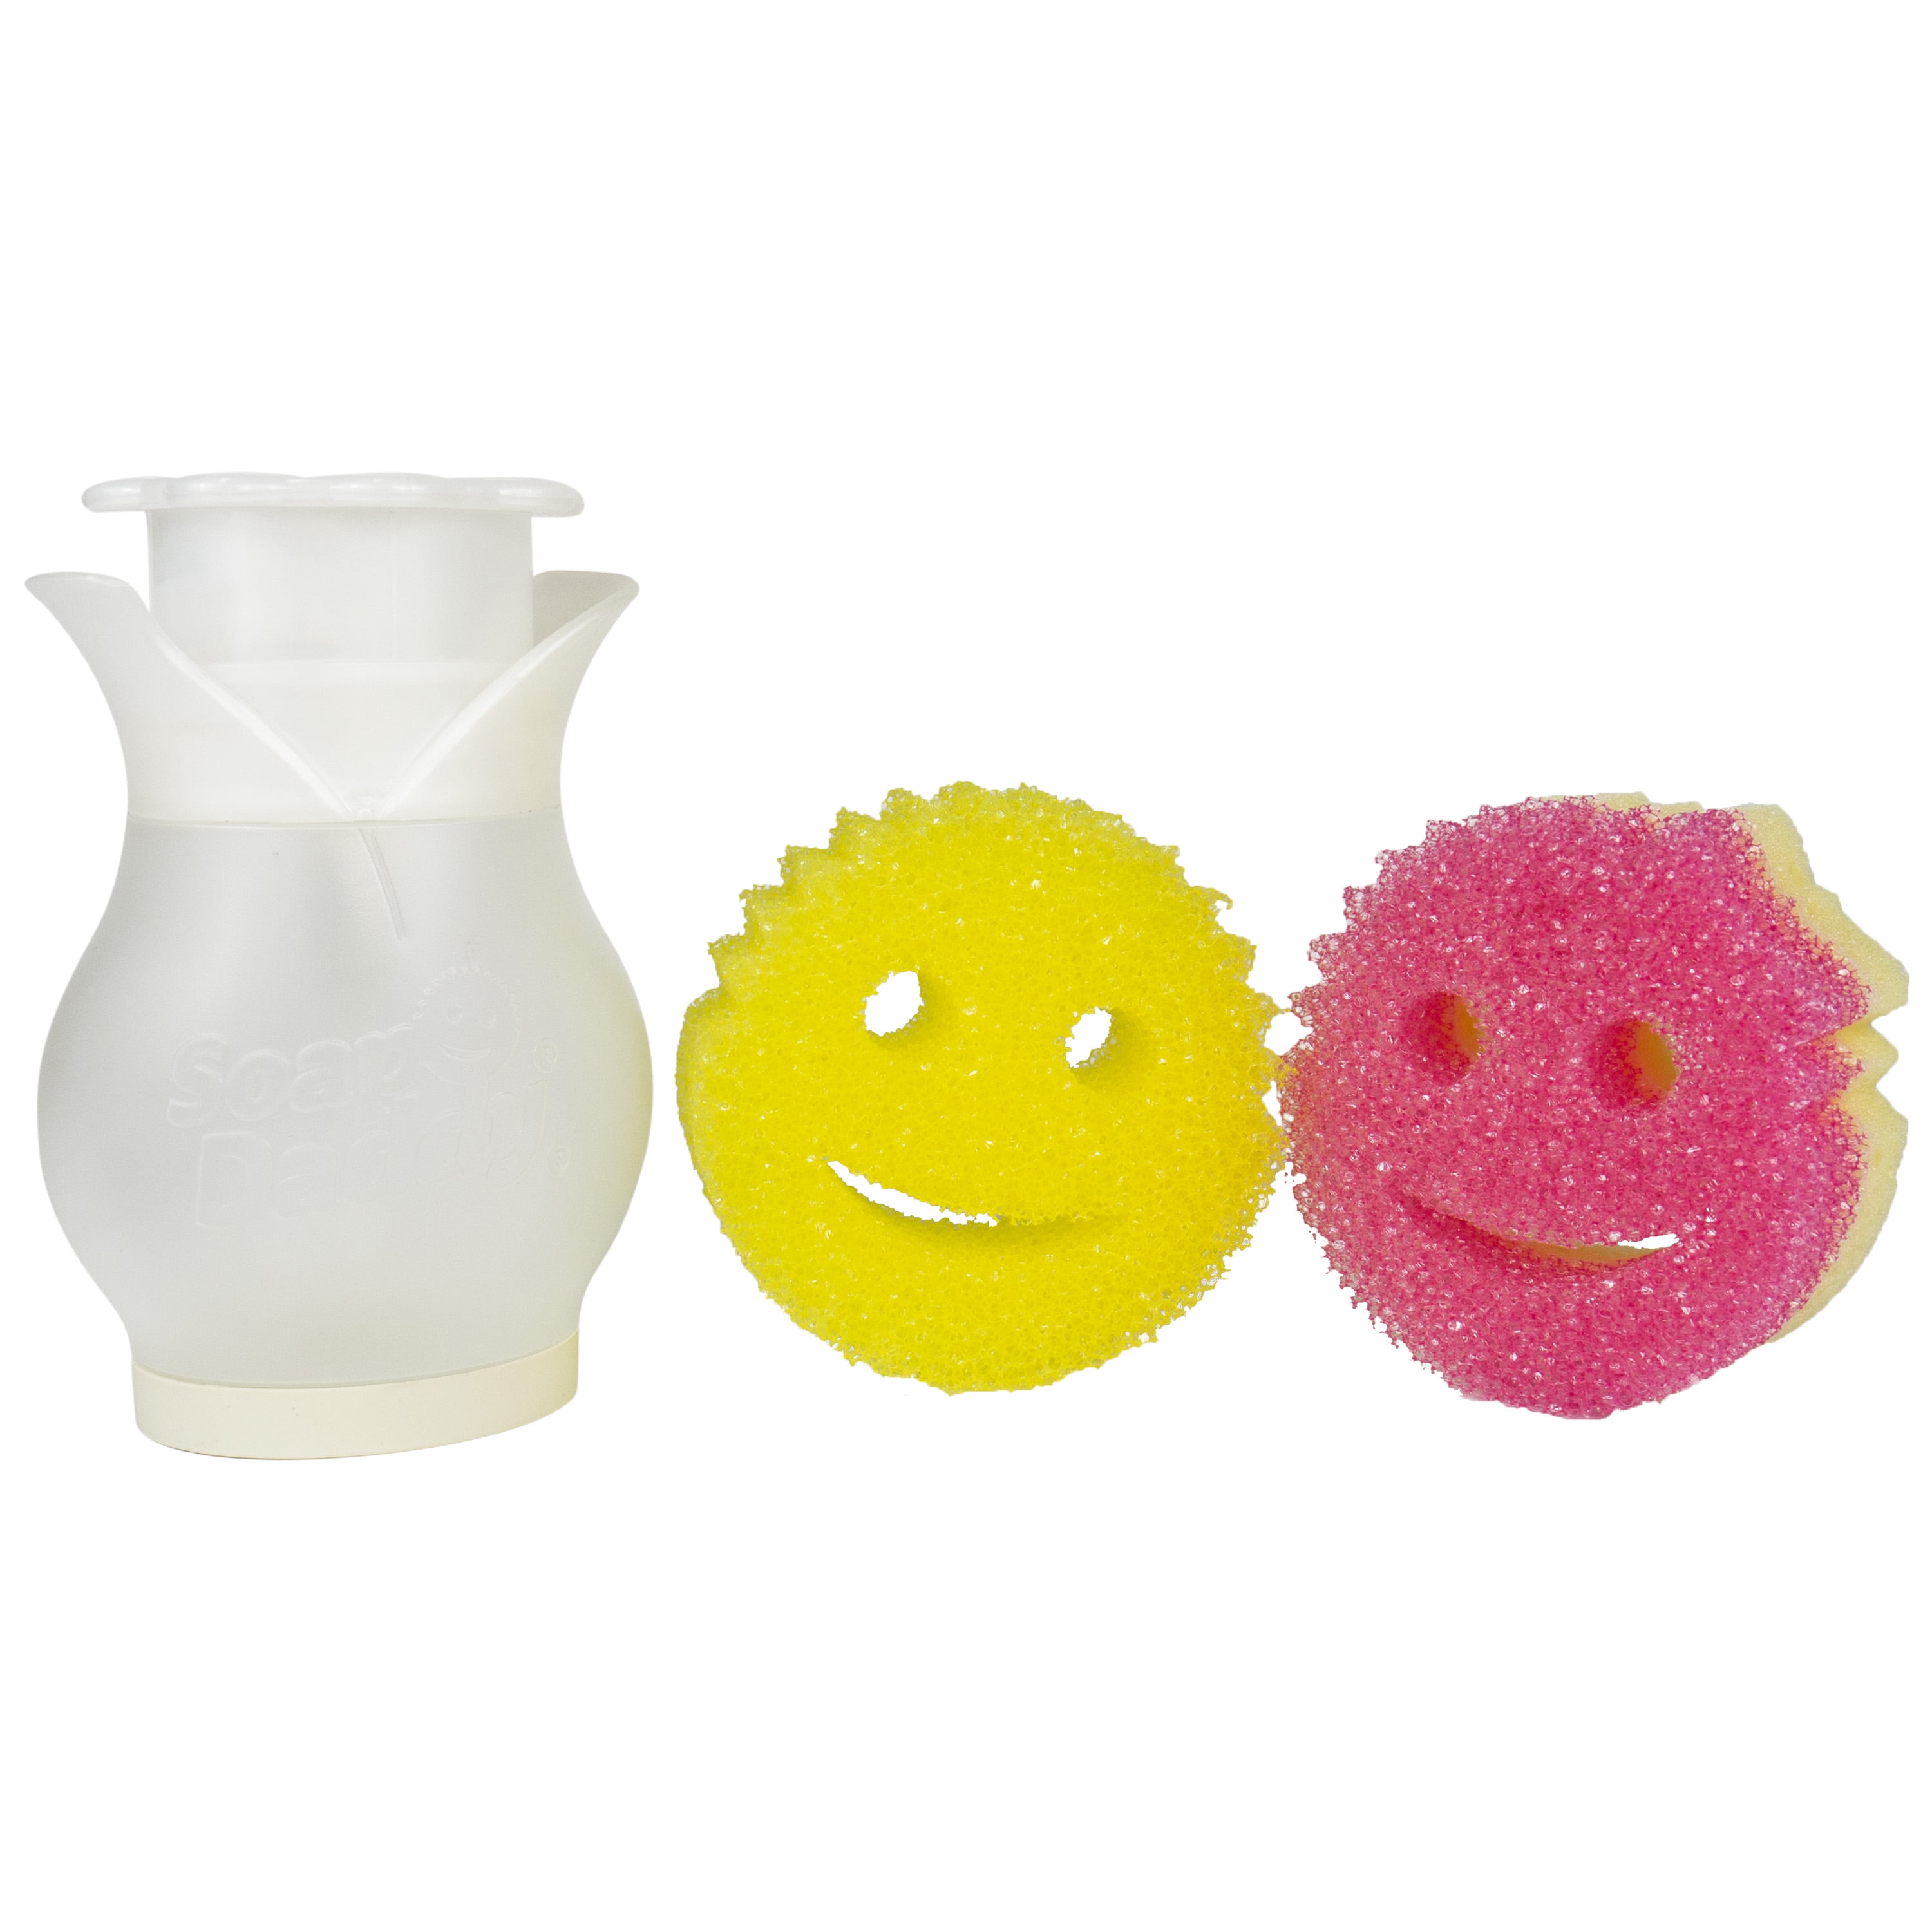 Scrub Daddy Kitchen Cleaning Bundle - Scrub Mommy Scrubber Sponge 1-Ct +  Soap Daddy Soap Dispenser (1-Count) Plus Daddy Caddy (1-Ct) 810044135374 -  The Home Depot